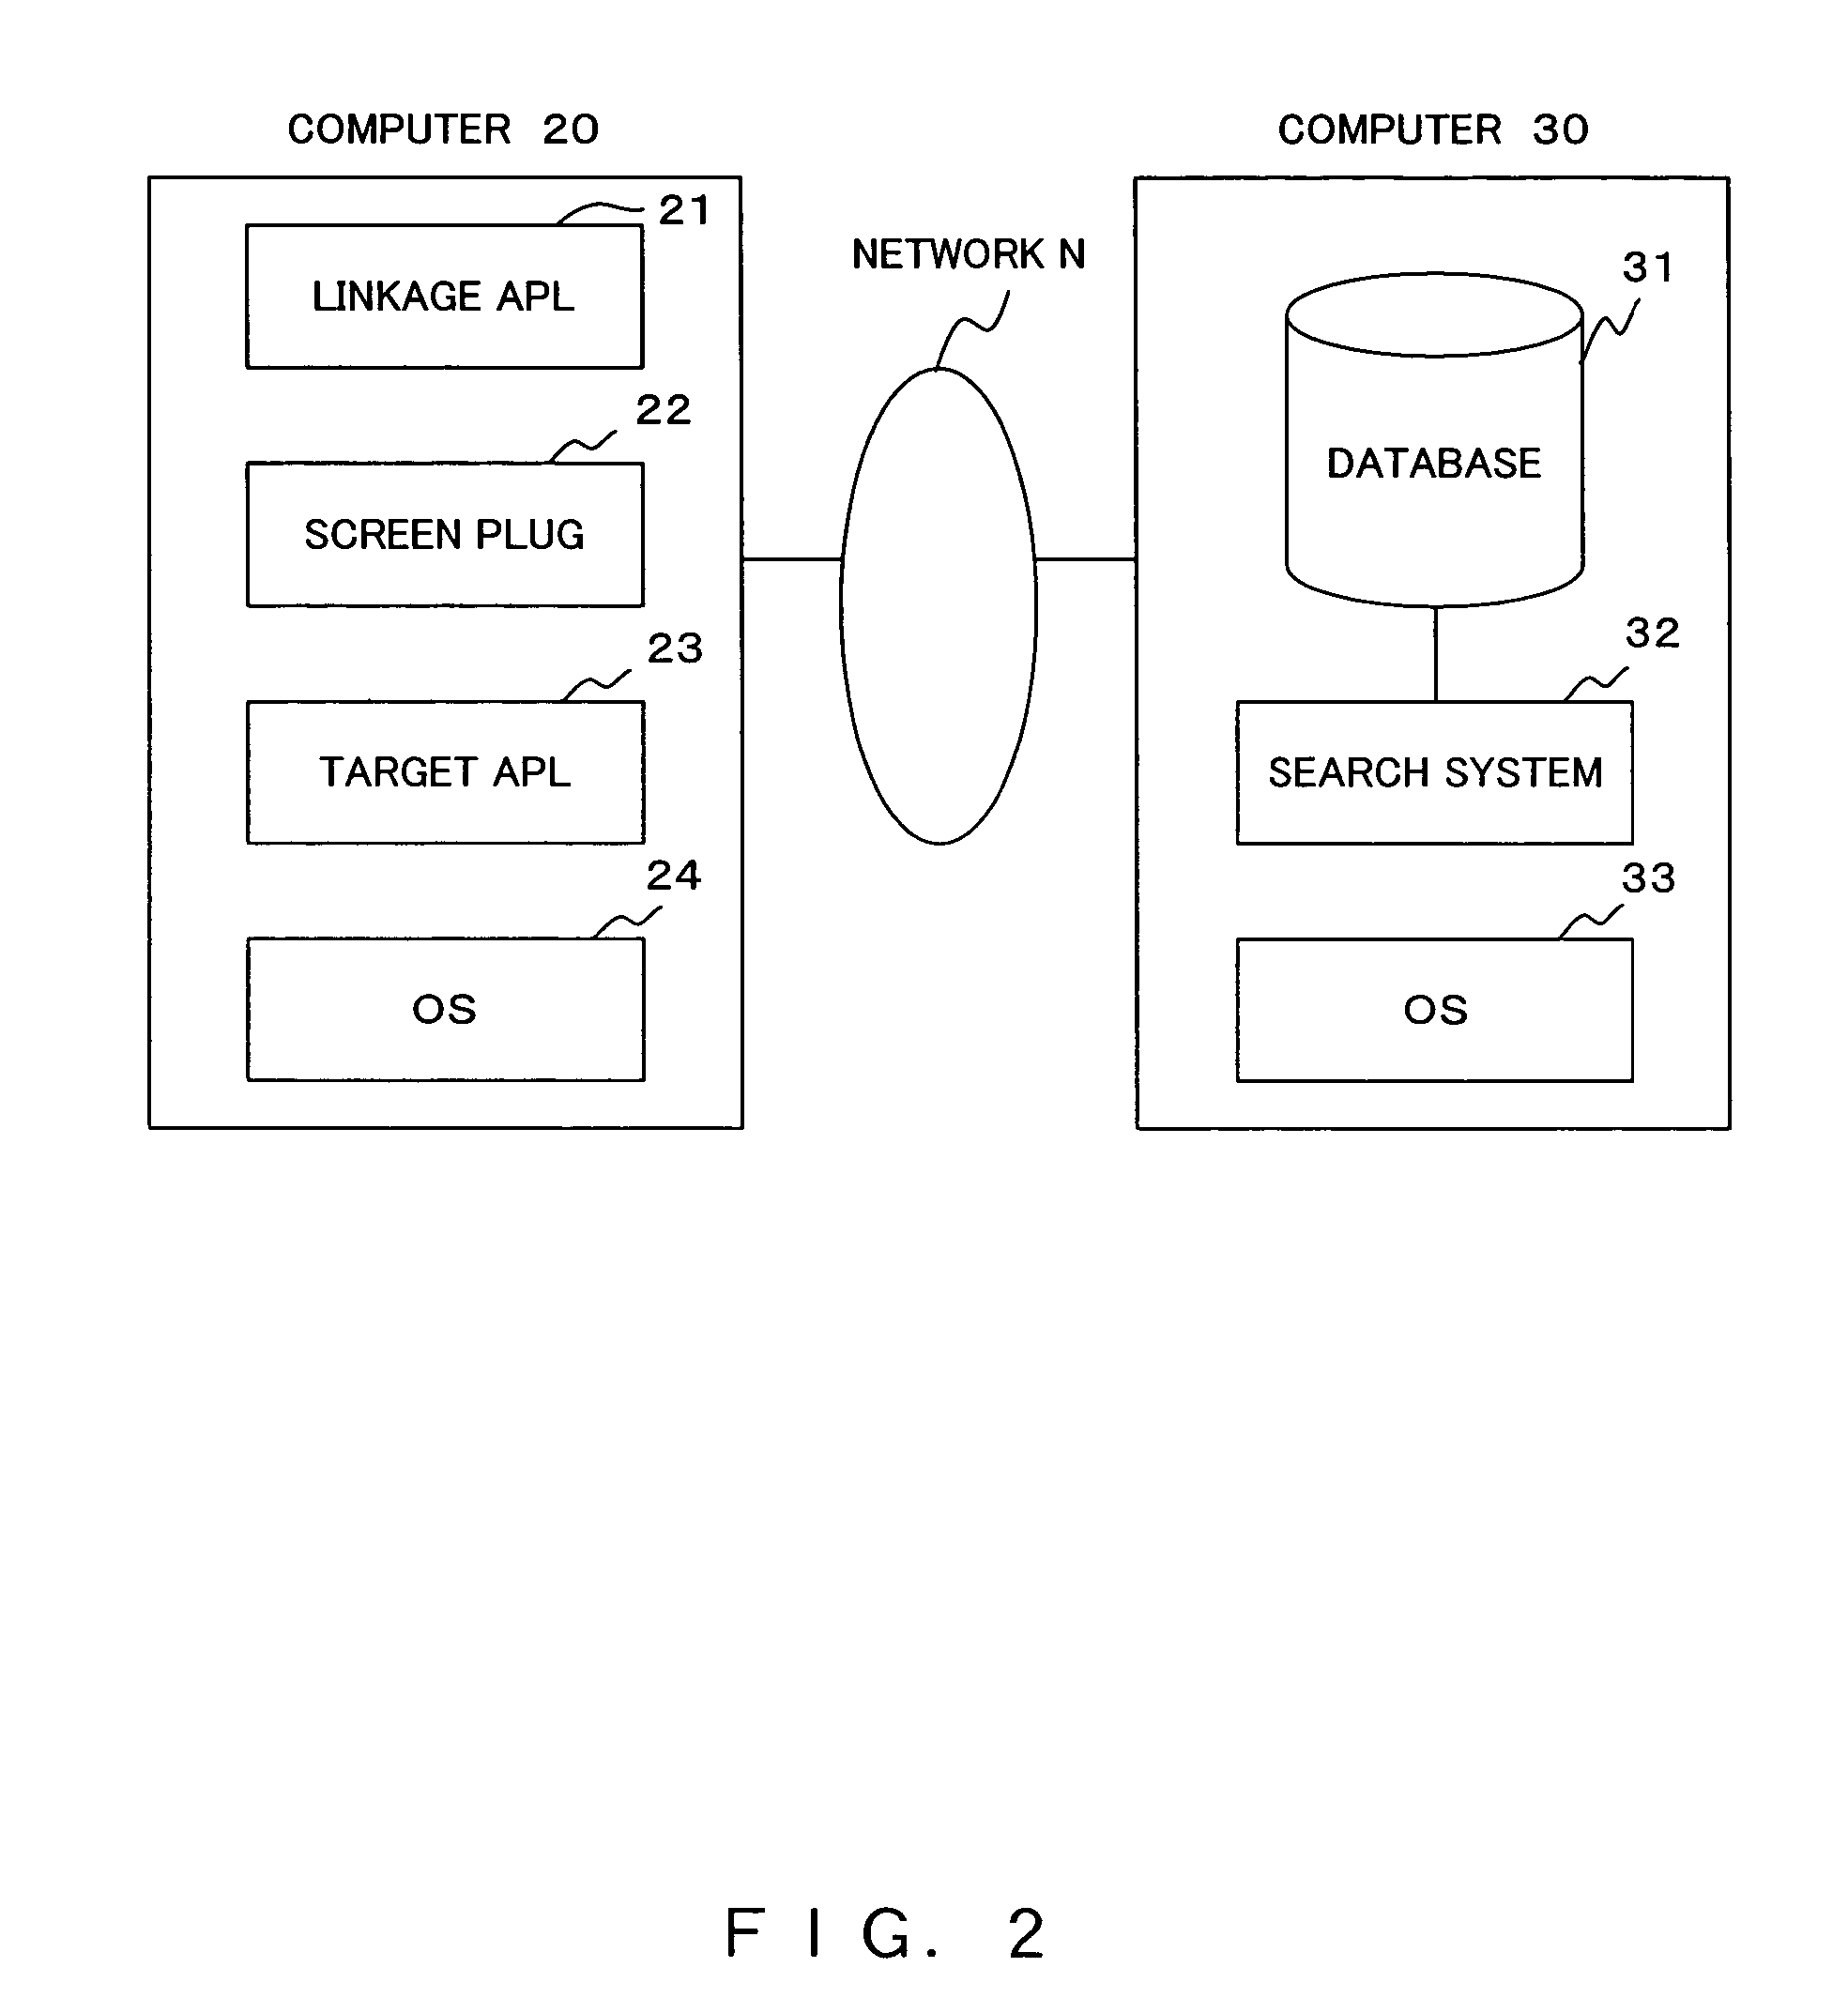 Method for supporting data linkage between applications